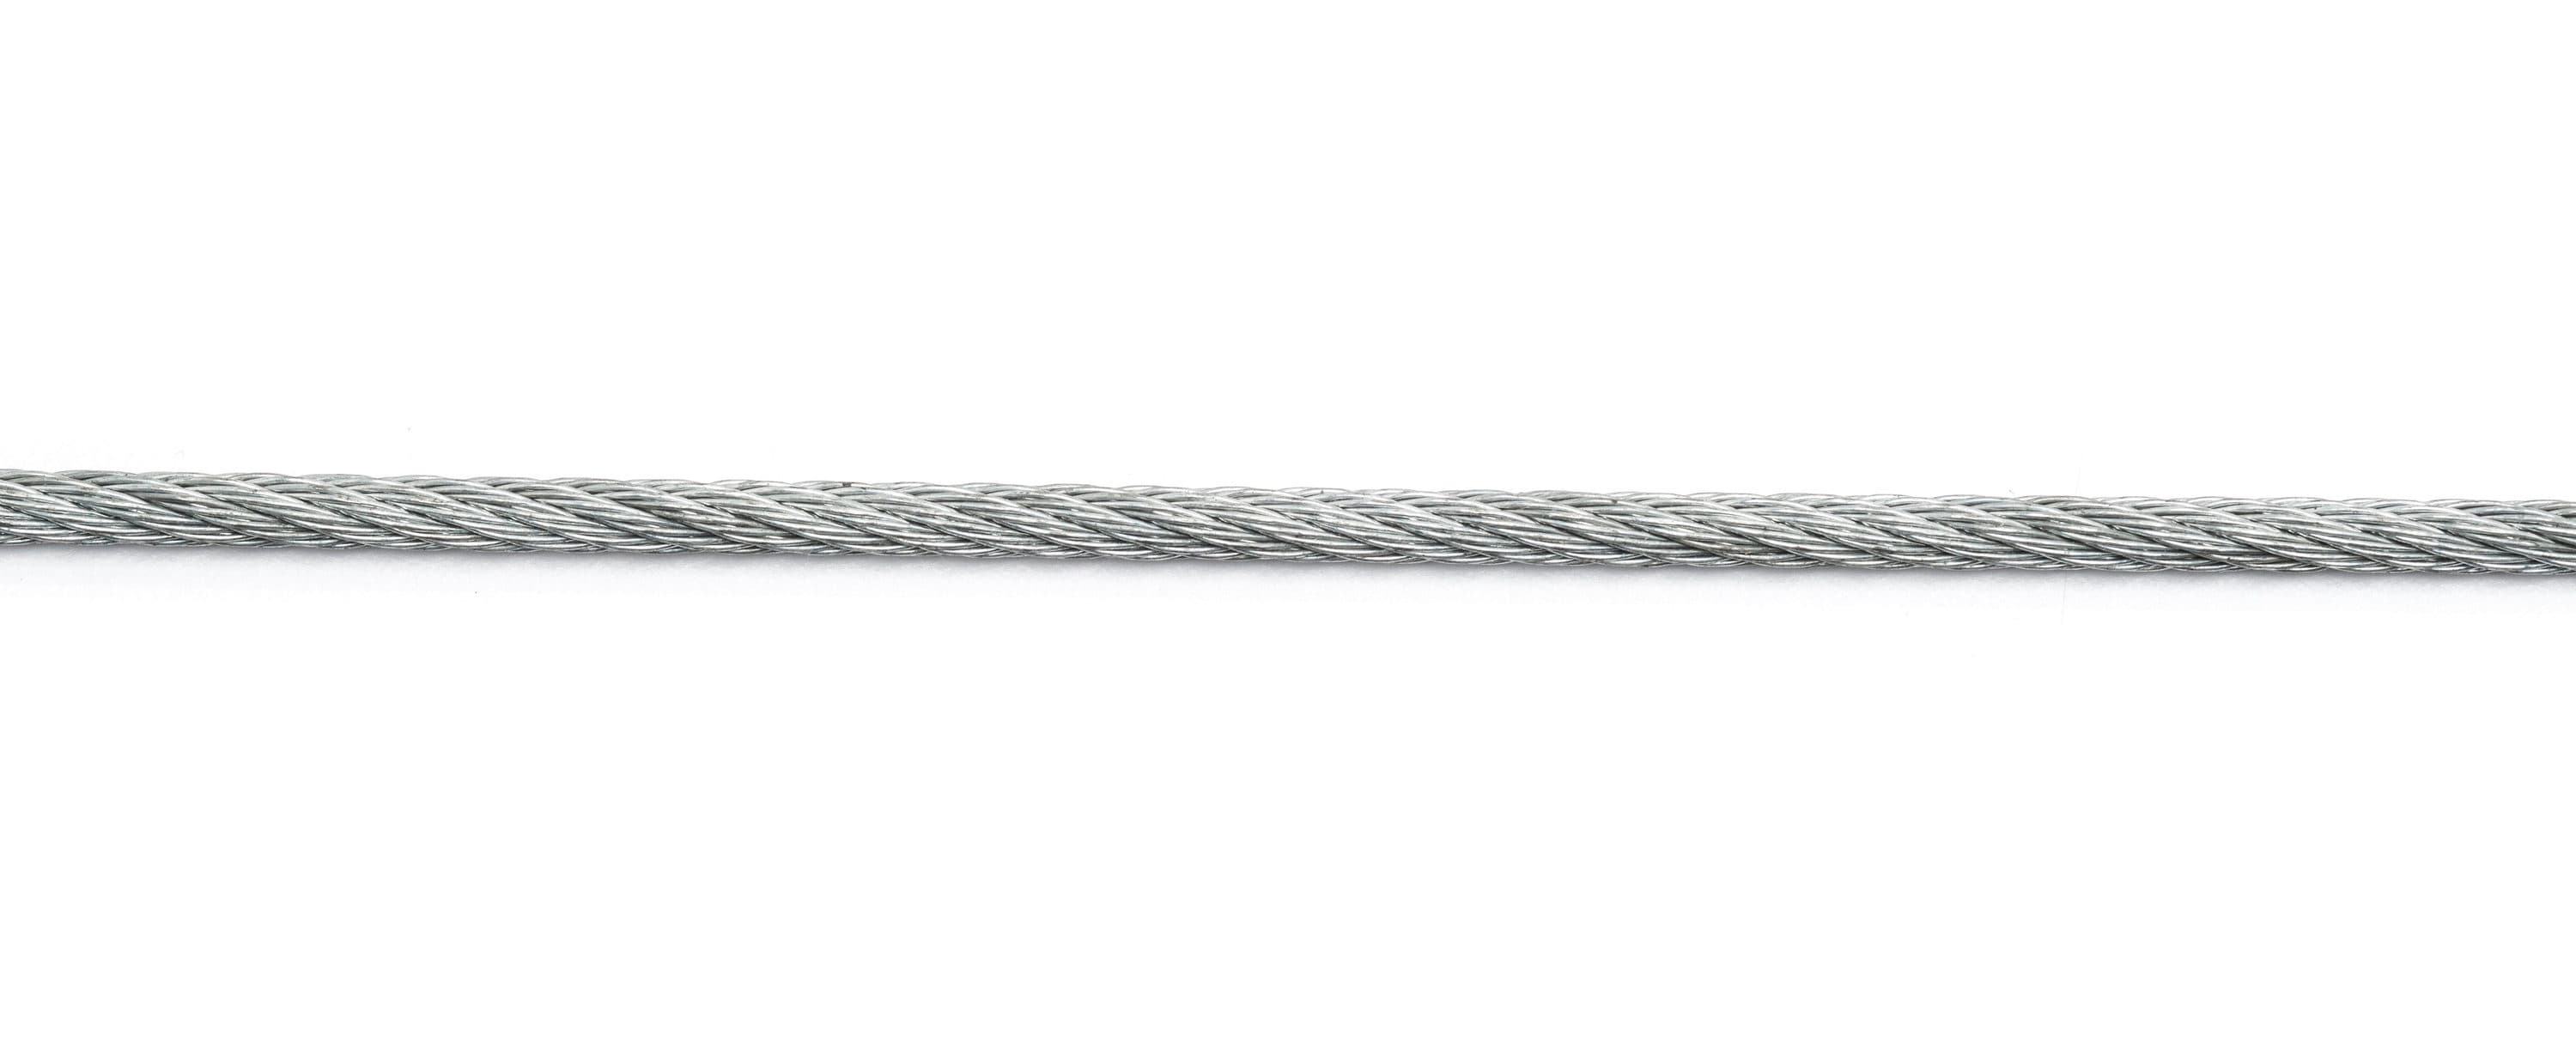 5/16 in. x 20 ft. Galvanized Uncoated Steel Wire Rope with Grab Hooks